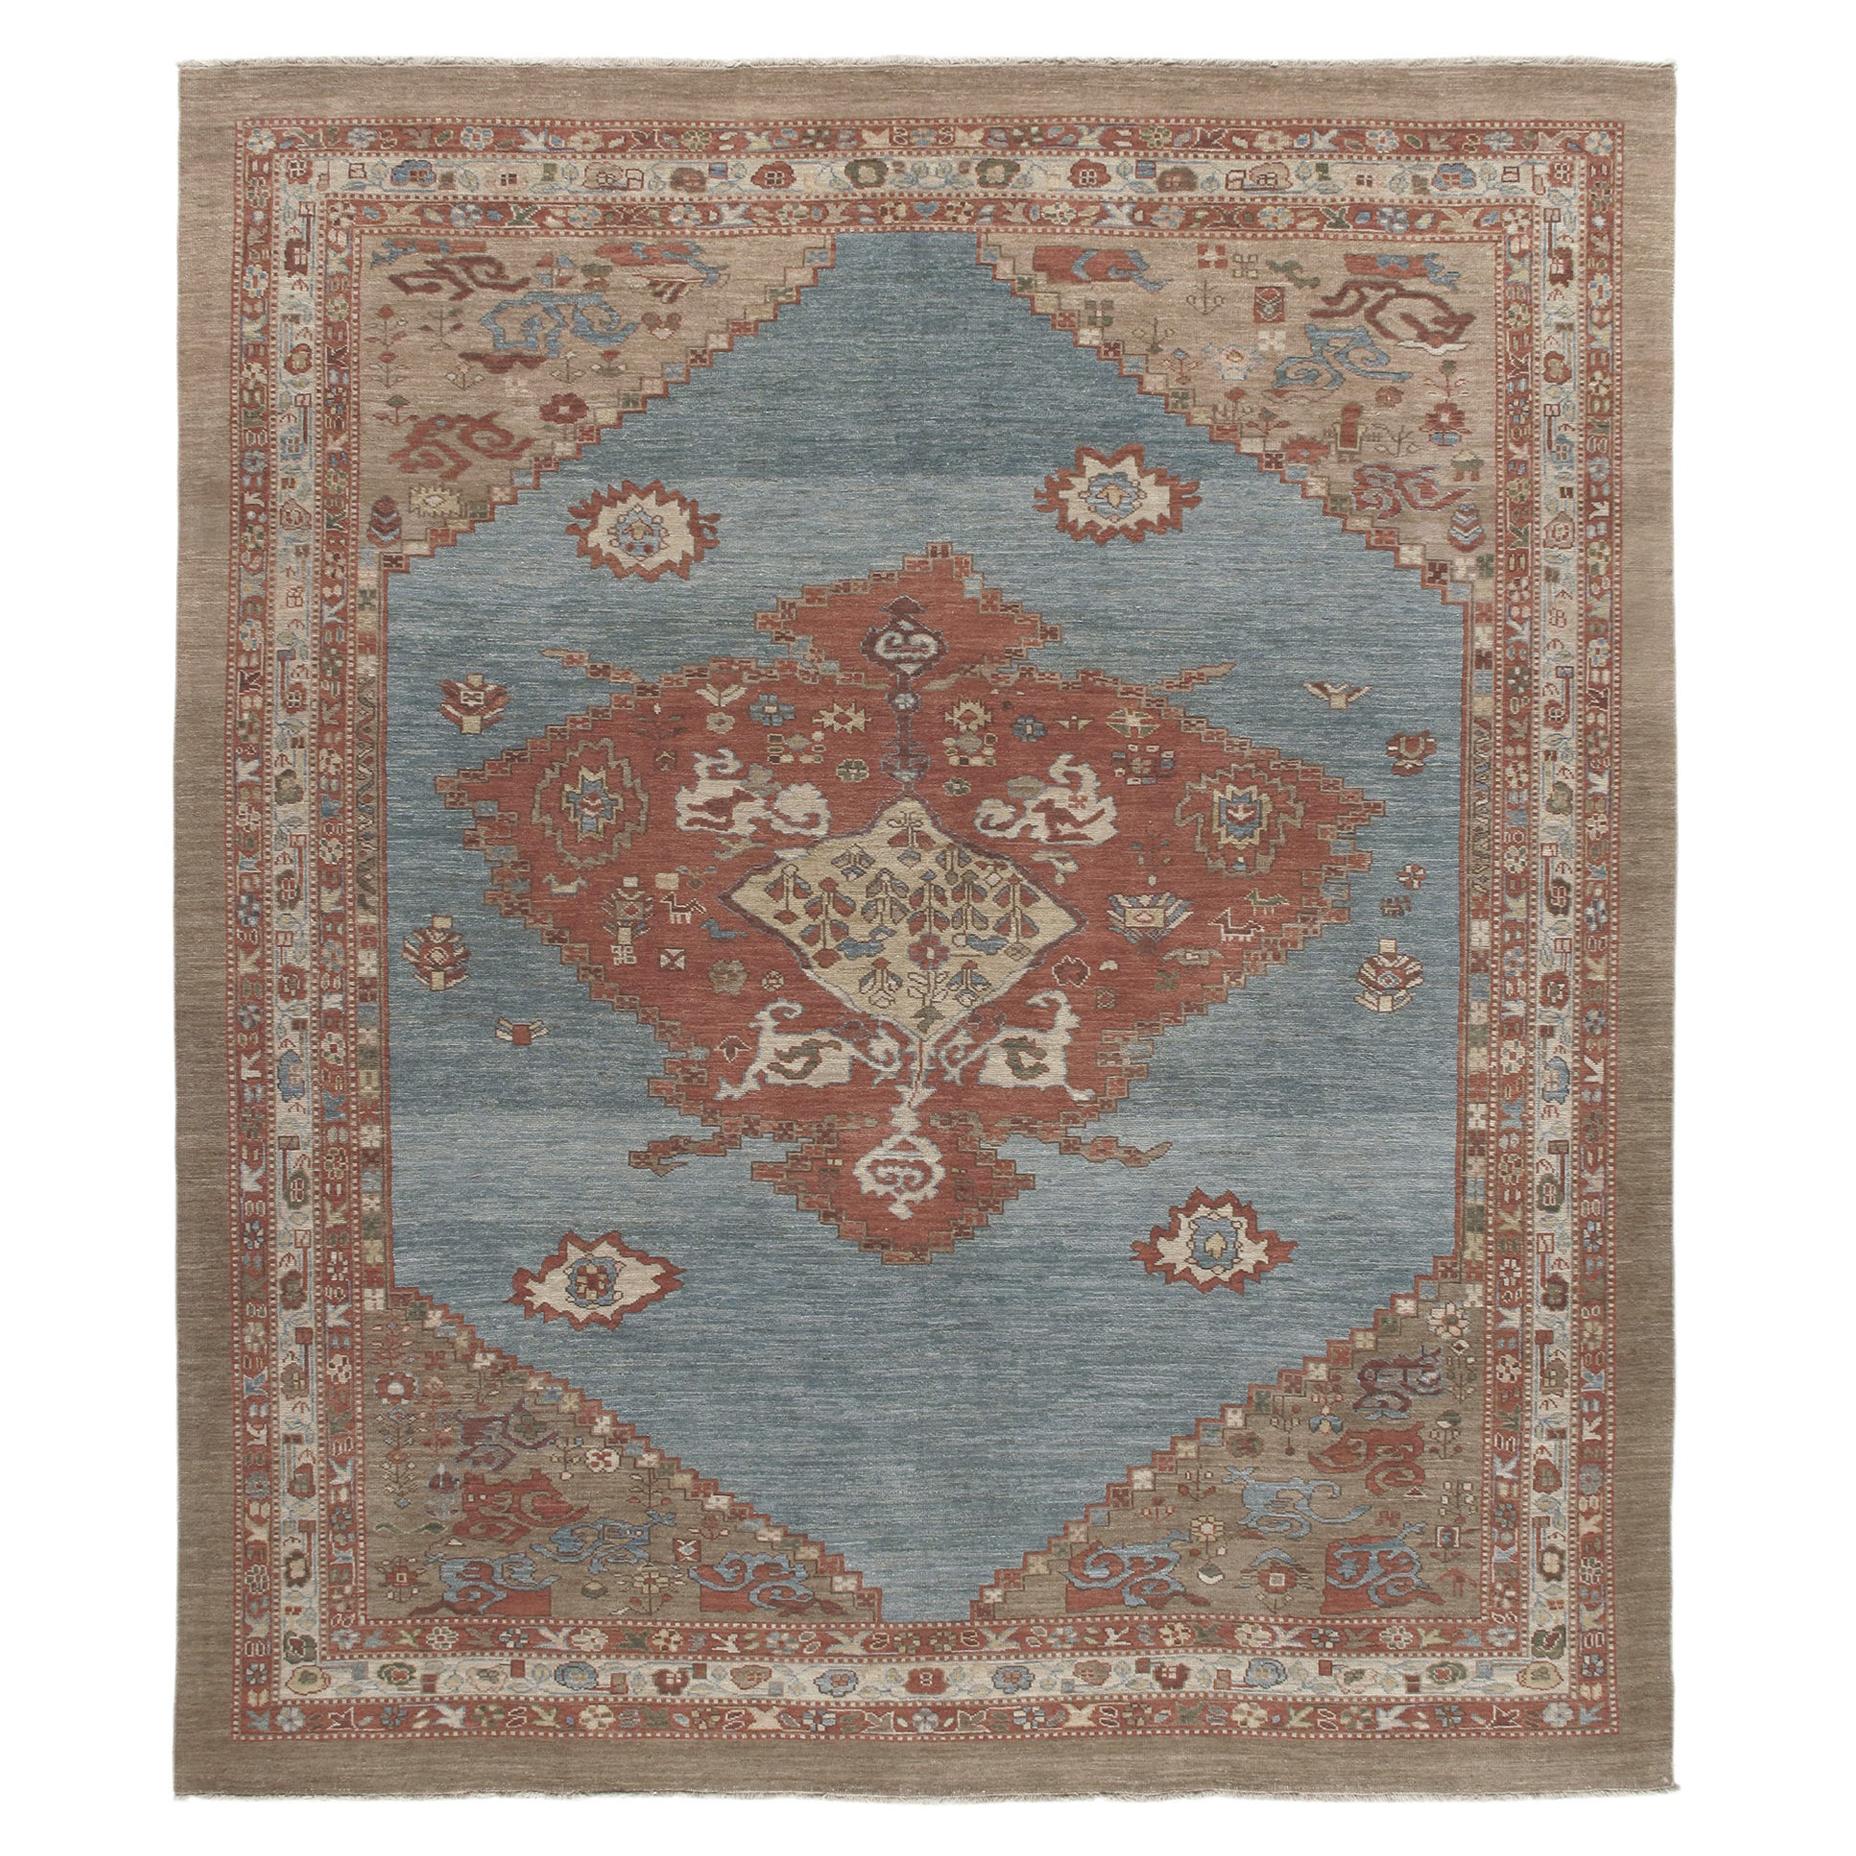 Persian Traditional Bakshaish Handknotted Rug in Blue, Rust, and Camel Color